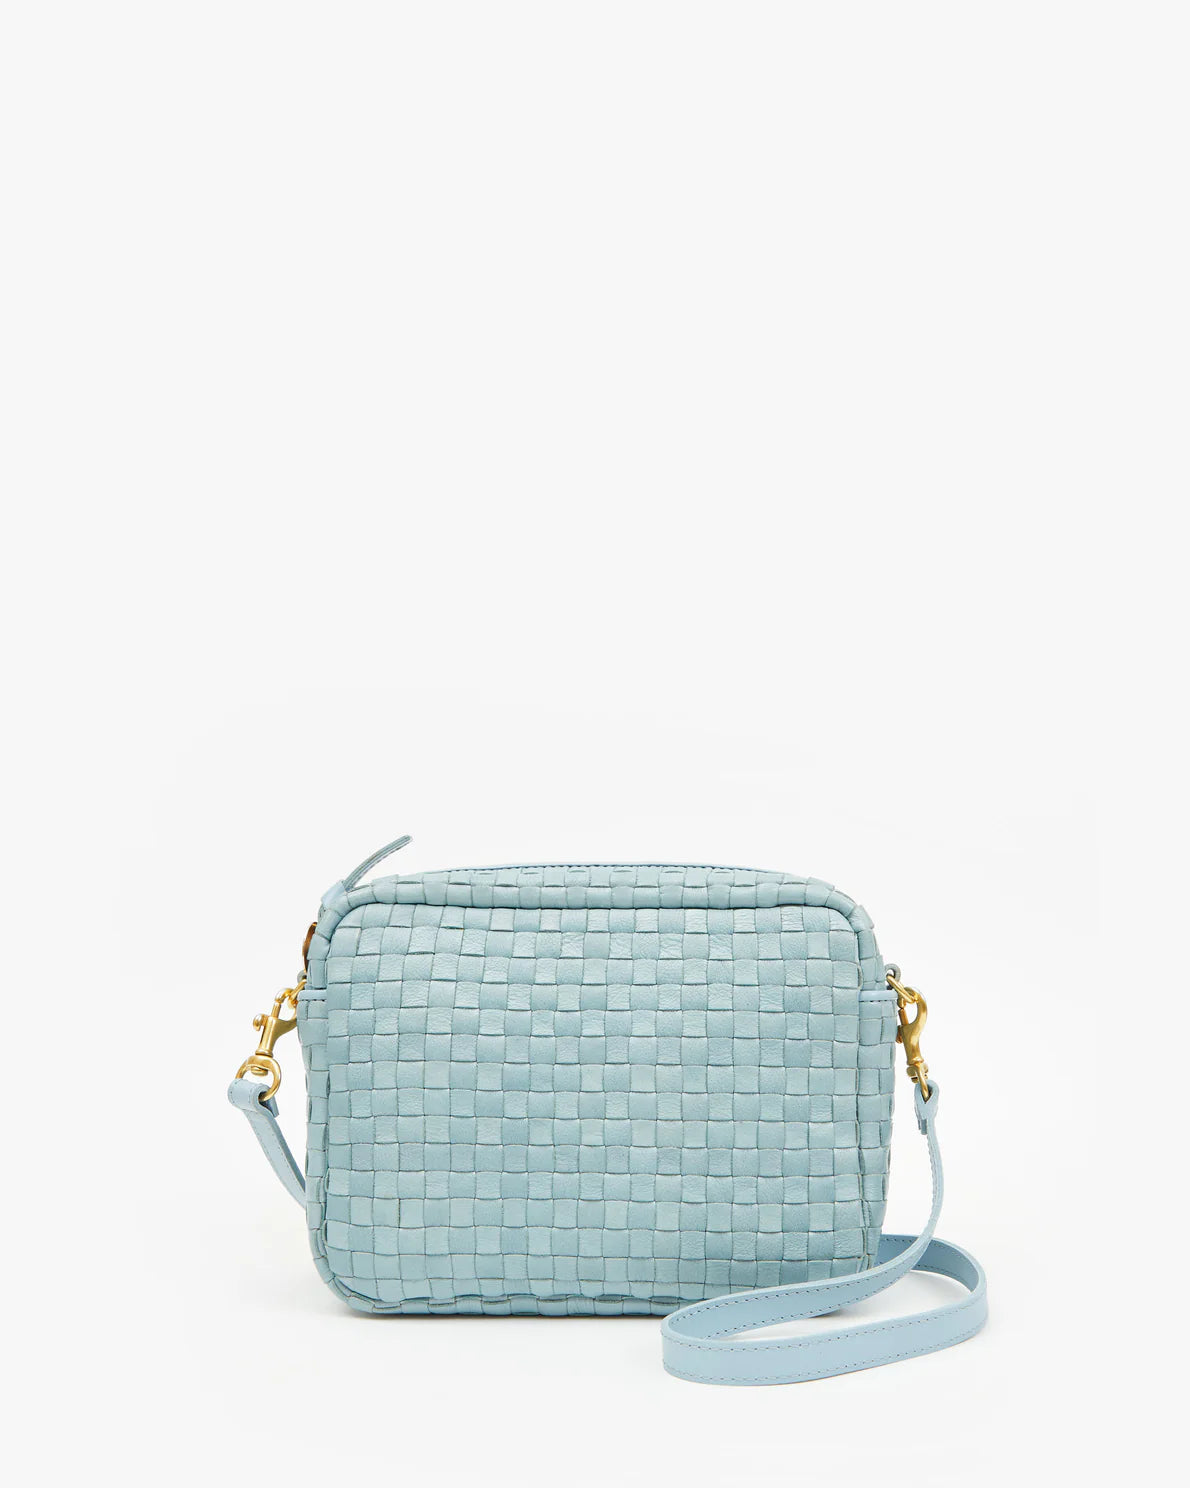 A light blue handwoven leather Clare Vivier Midi Sac crossbody bag with a gold zipper and a thin matching strap, displayed against a white background.